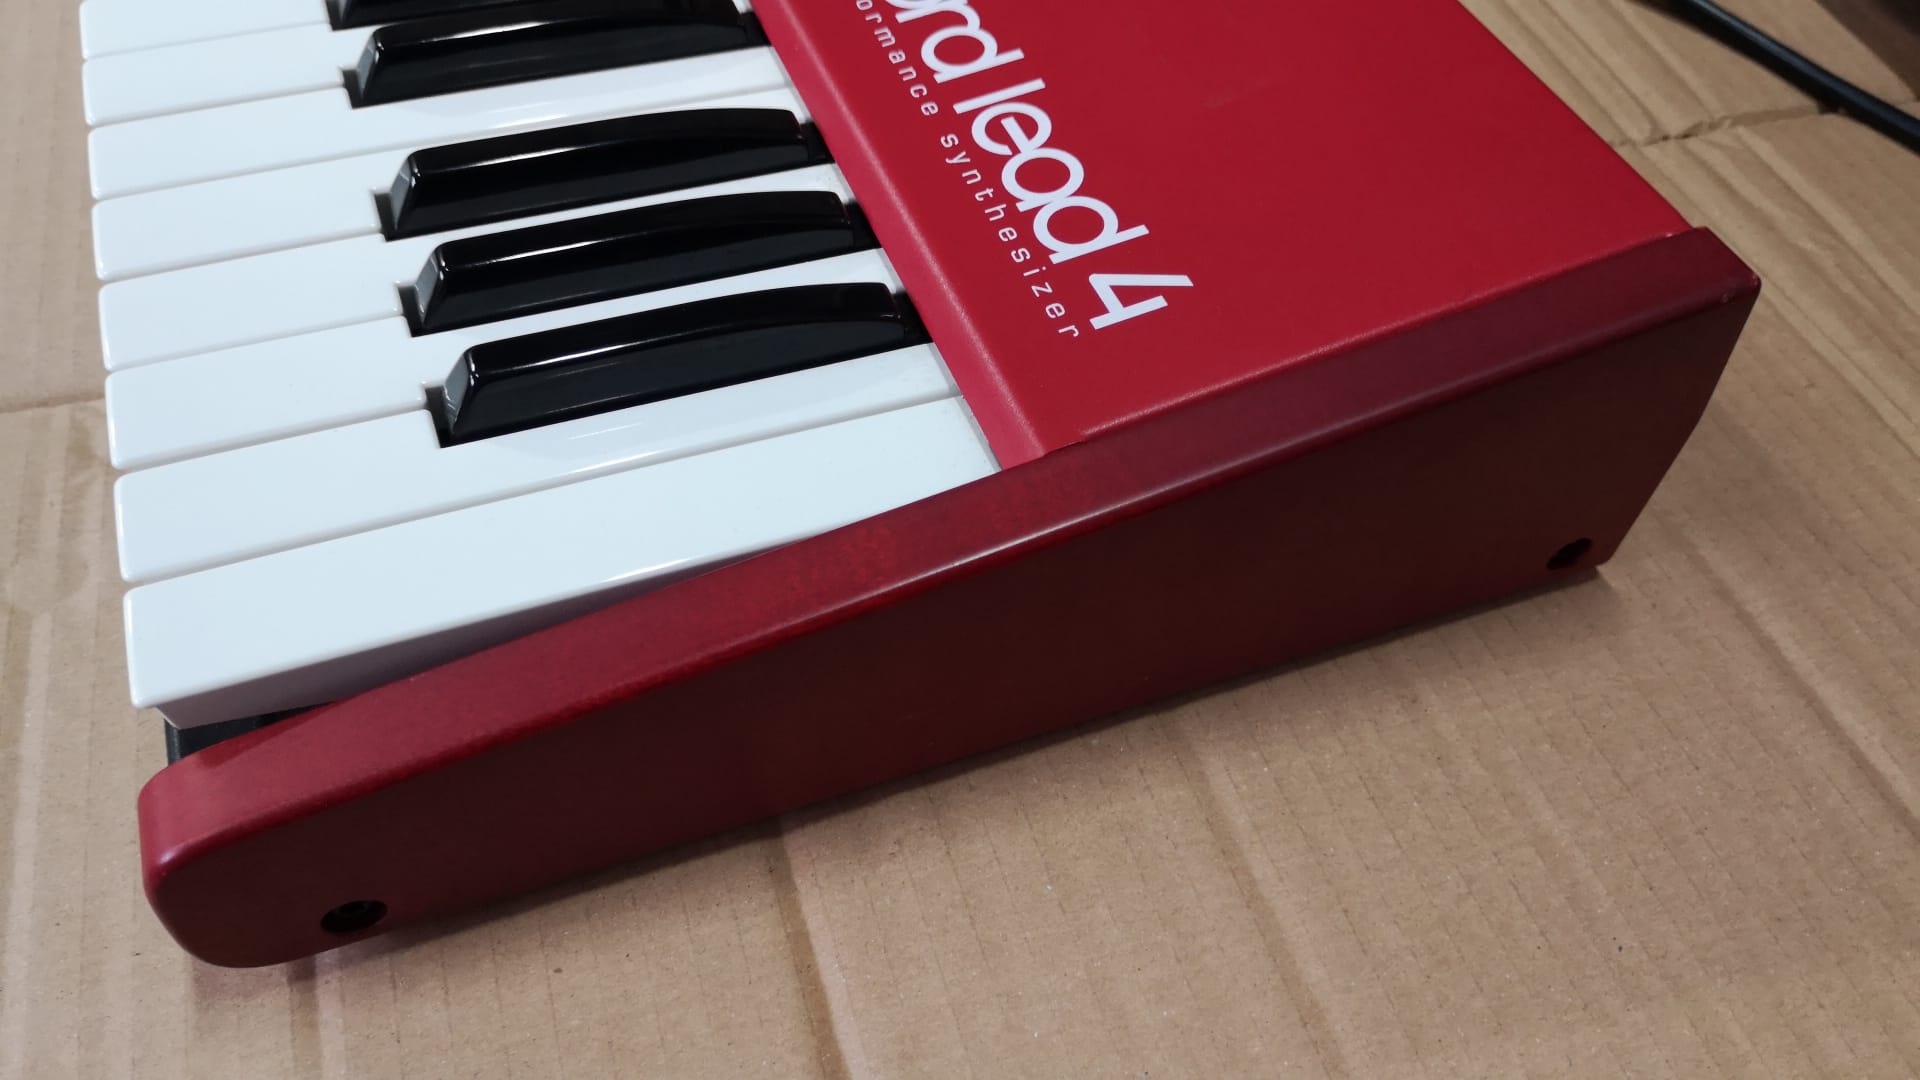 NORD LEAD 4 SYNTH / Synthonia Libraries